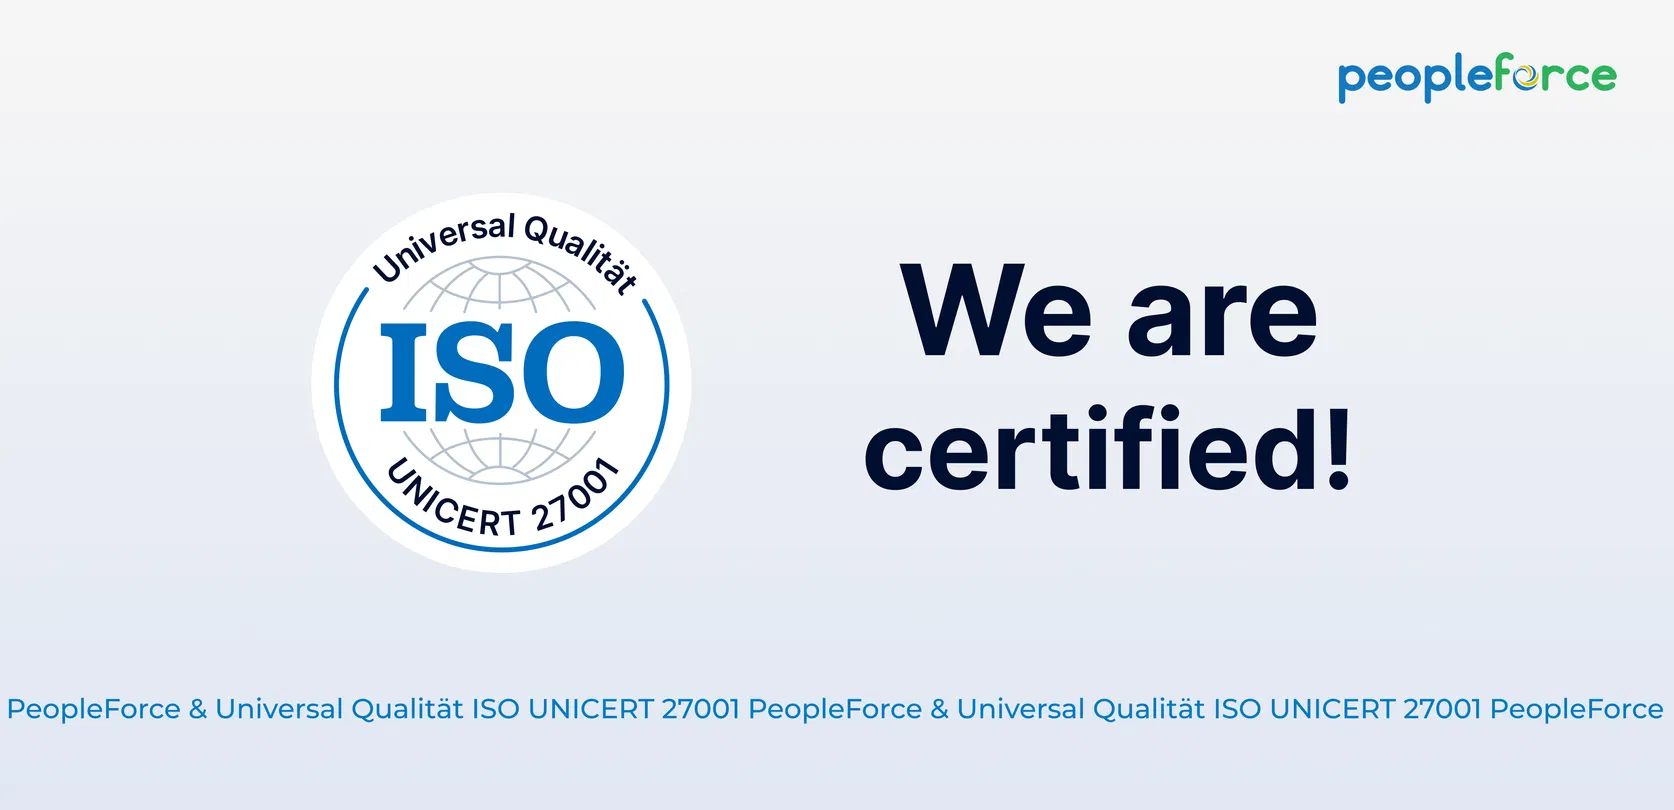 PeopleForce achieves ISO 27001:2013 certification for information security